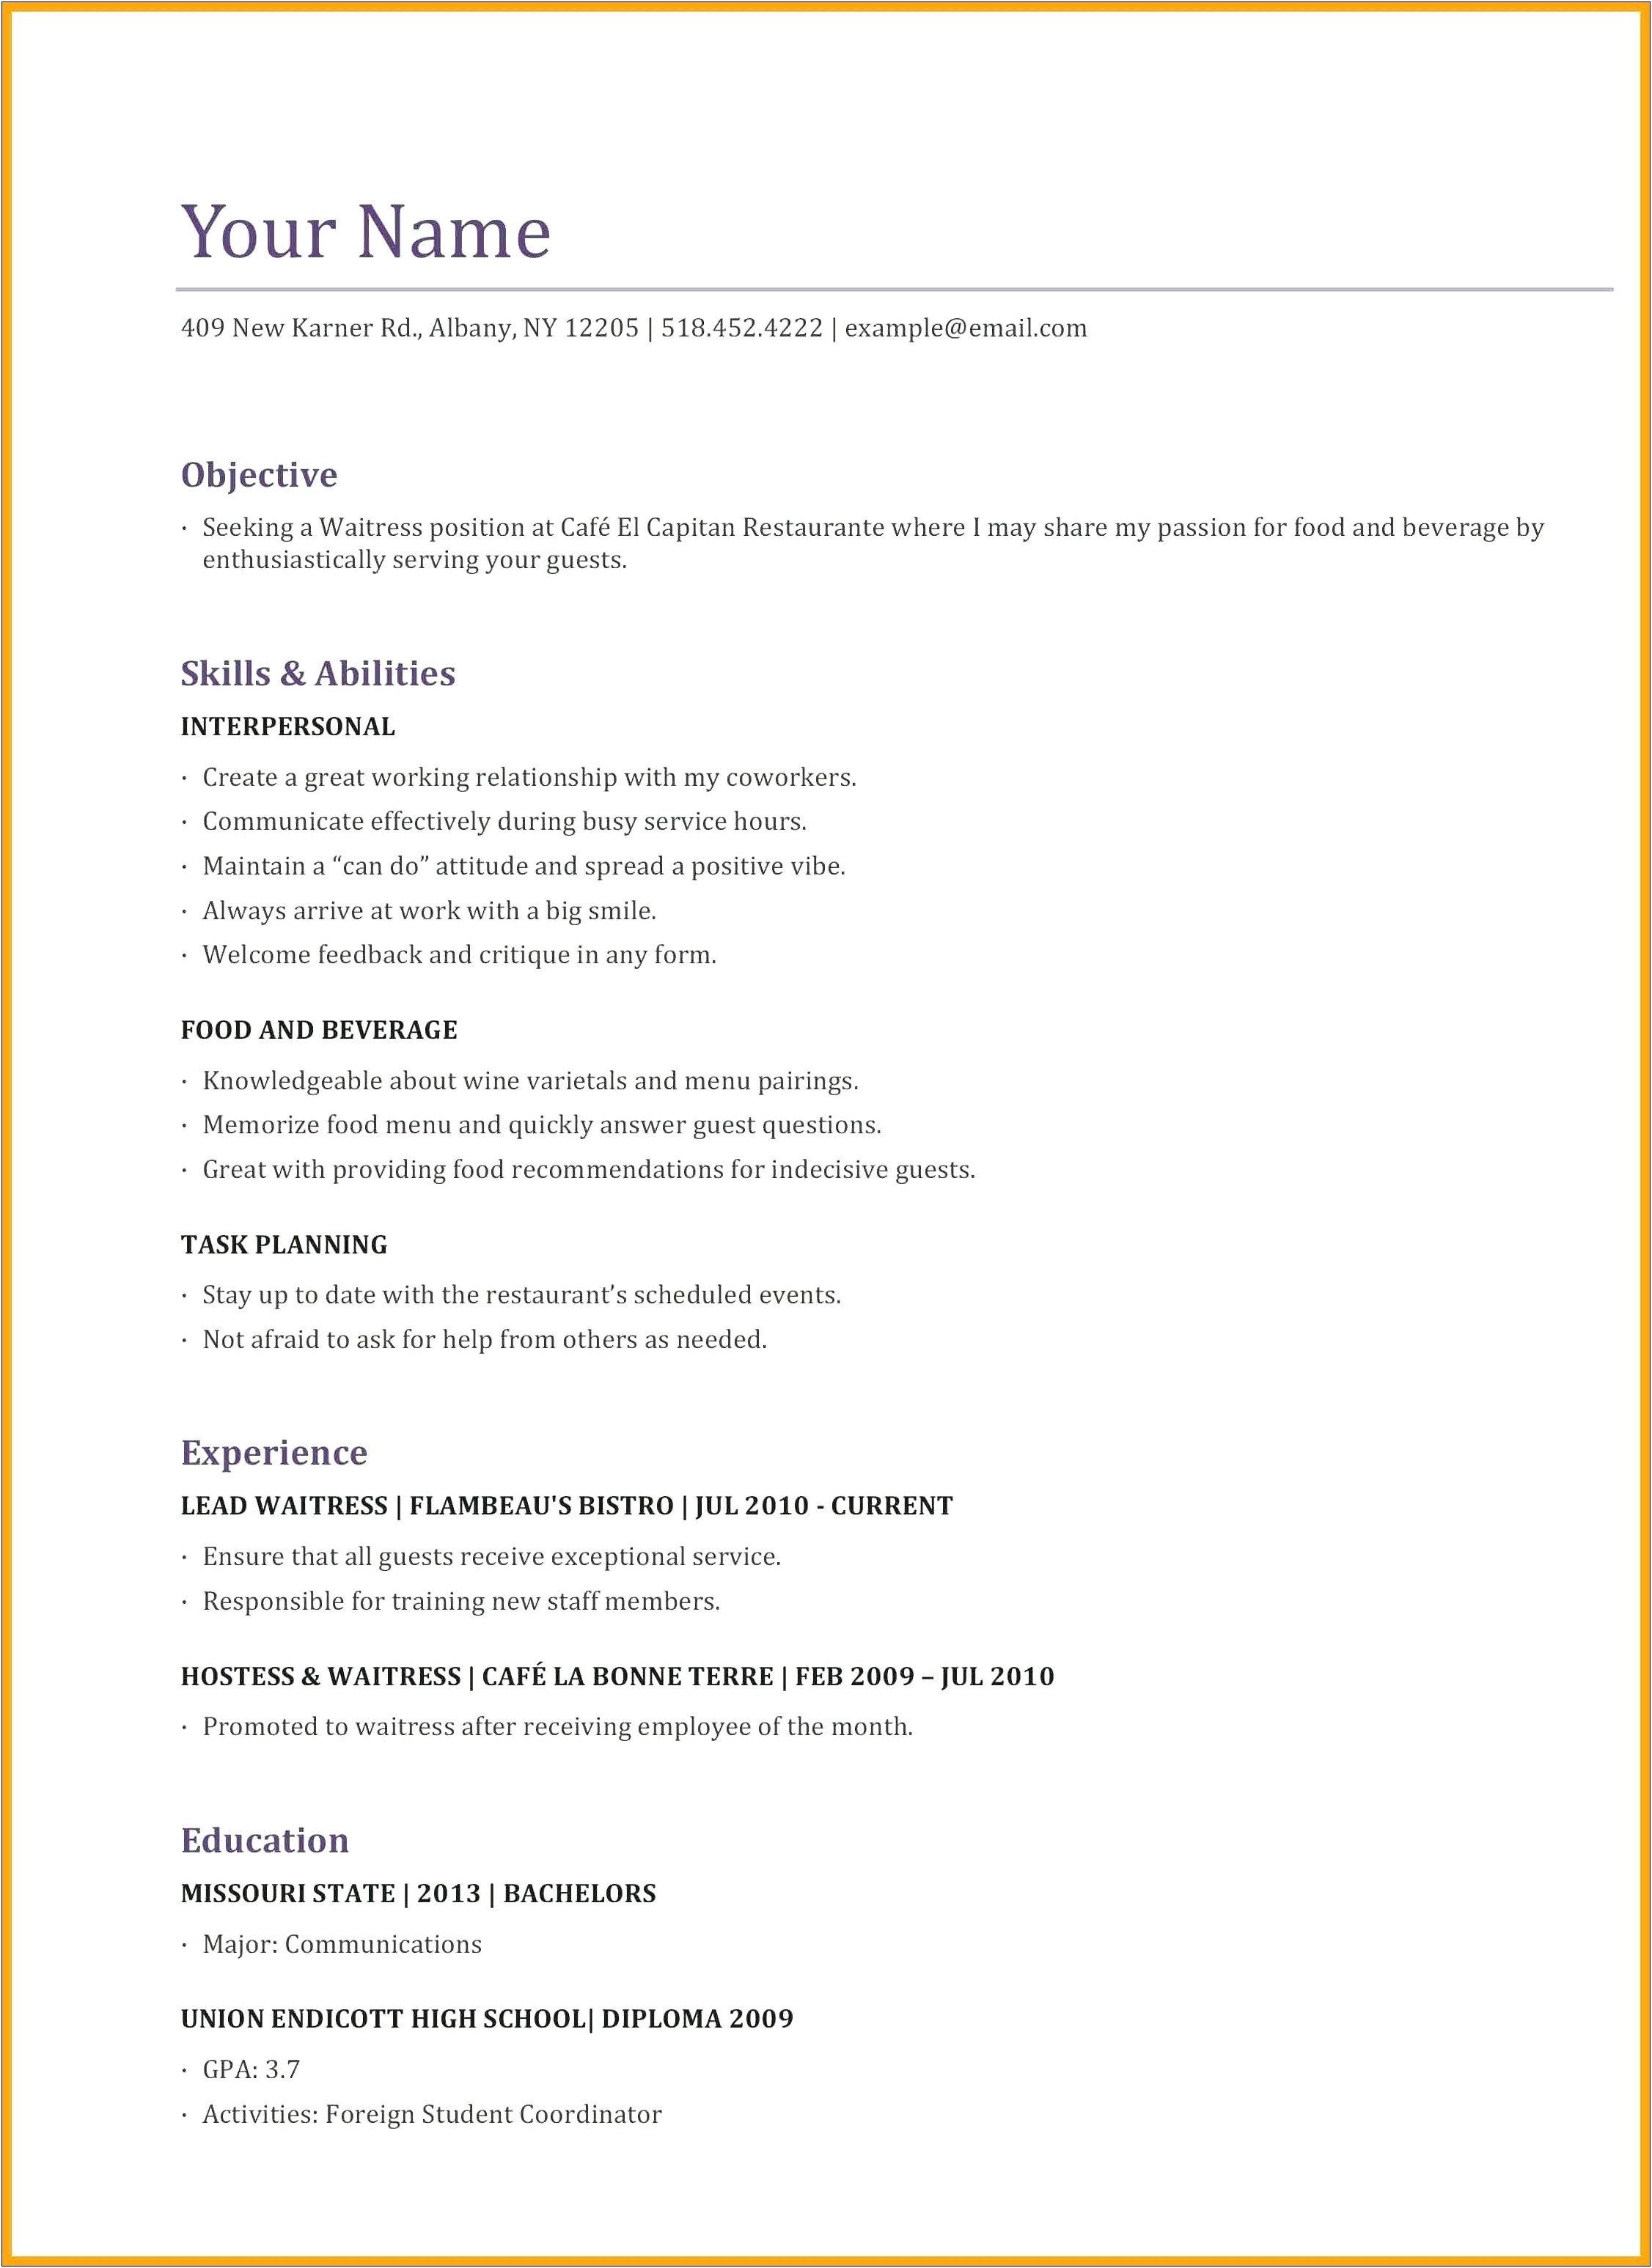 Example Resume For Food Server